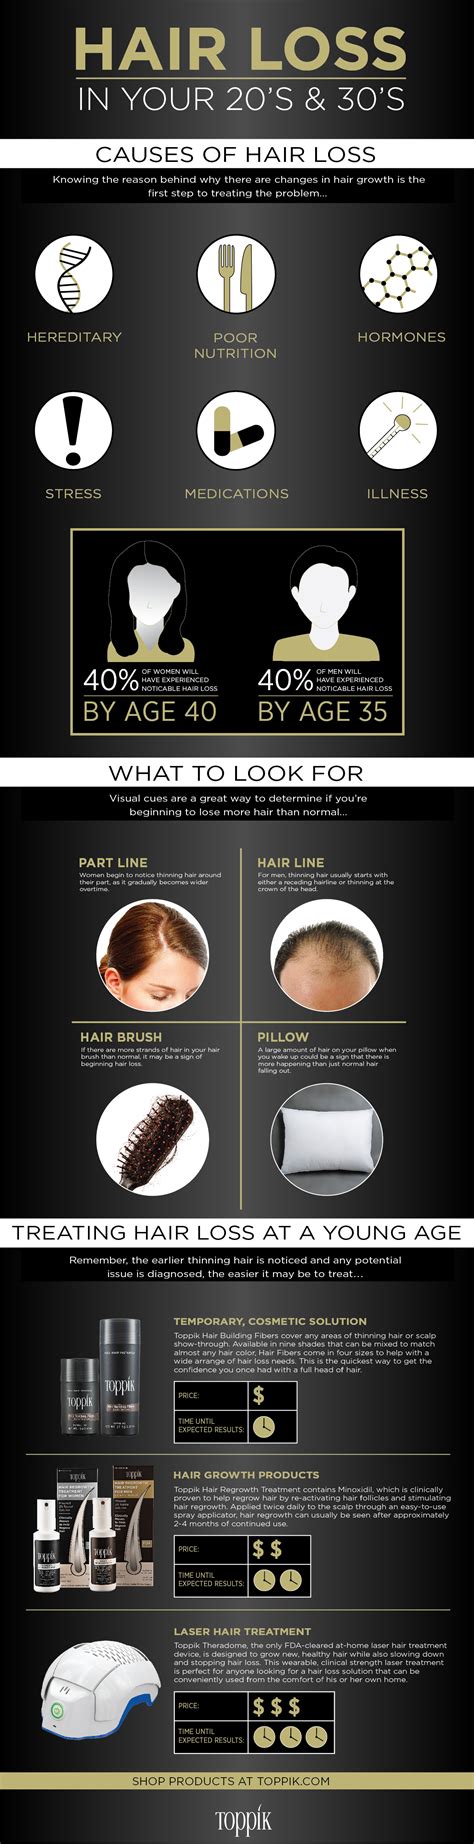 Hair Toppiks Thinning Hair And Hair Loss In Your 20s And 30s